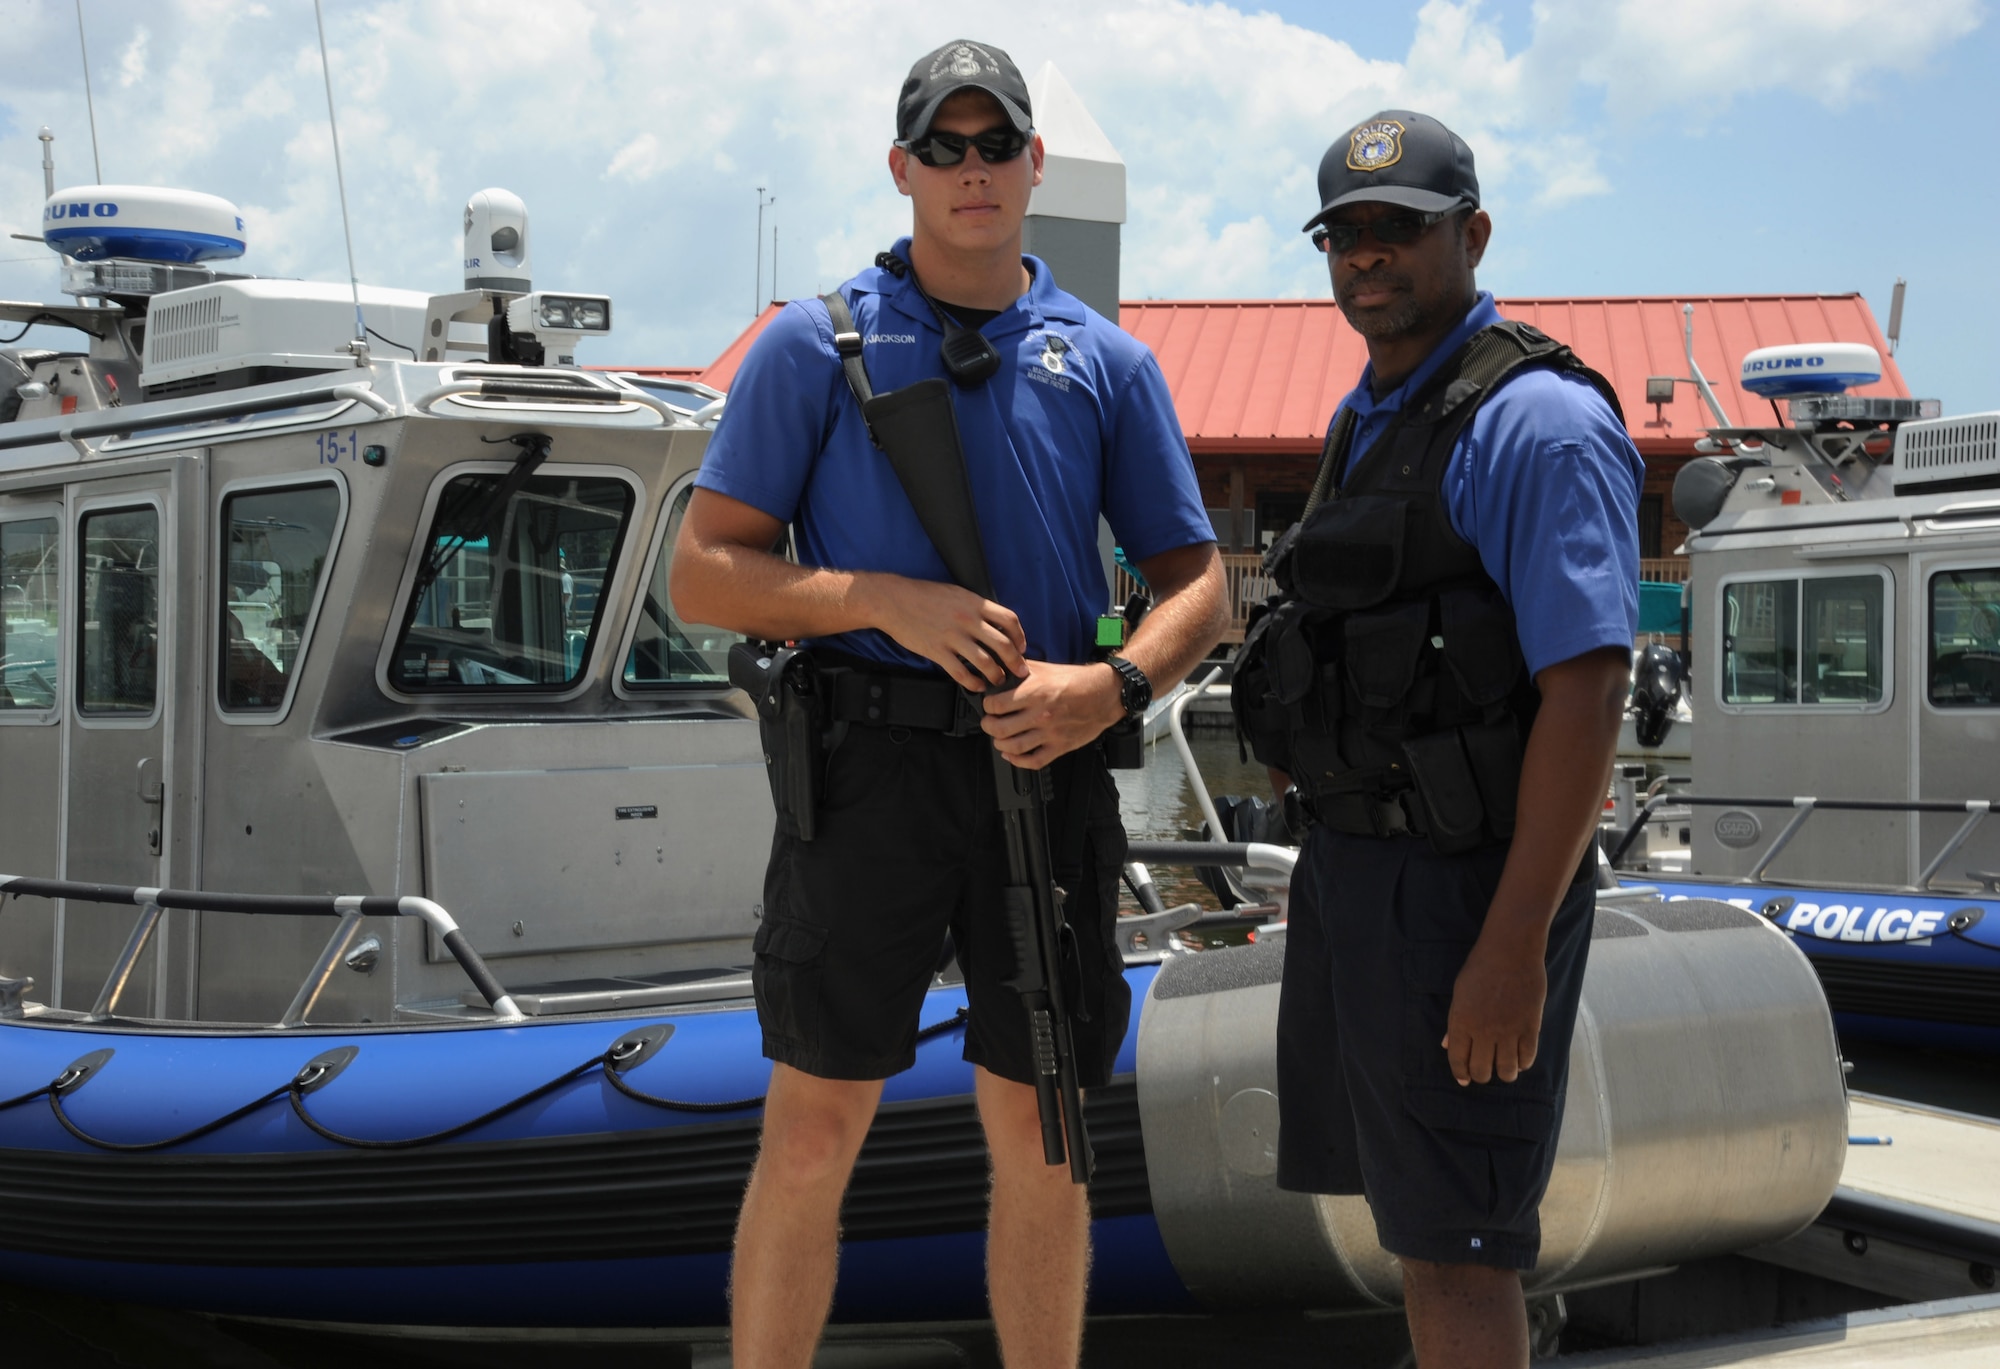 Senior Airman Craig Jackson, left, a marine patrol crewmember and Officer Dana Jette, right, a civilian marine patrol crewmember, both assigned to the 6th Security Forces Squadron (SFS) pause for a photo at the marina on MacDill Air Force Base, Fla., July 20, 2016. The 6th SFS marine patrol is the only force of its kind to operate 24/7 in the Air Force. (U.S. Air Force photo by Airman Adam R. Shanks)